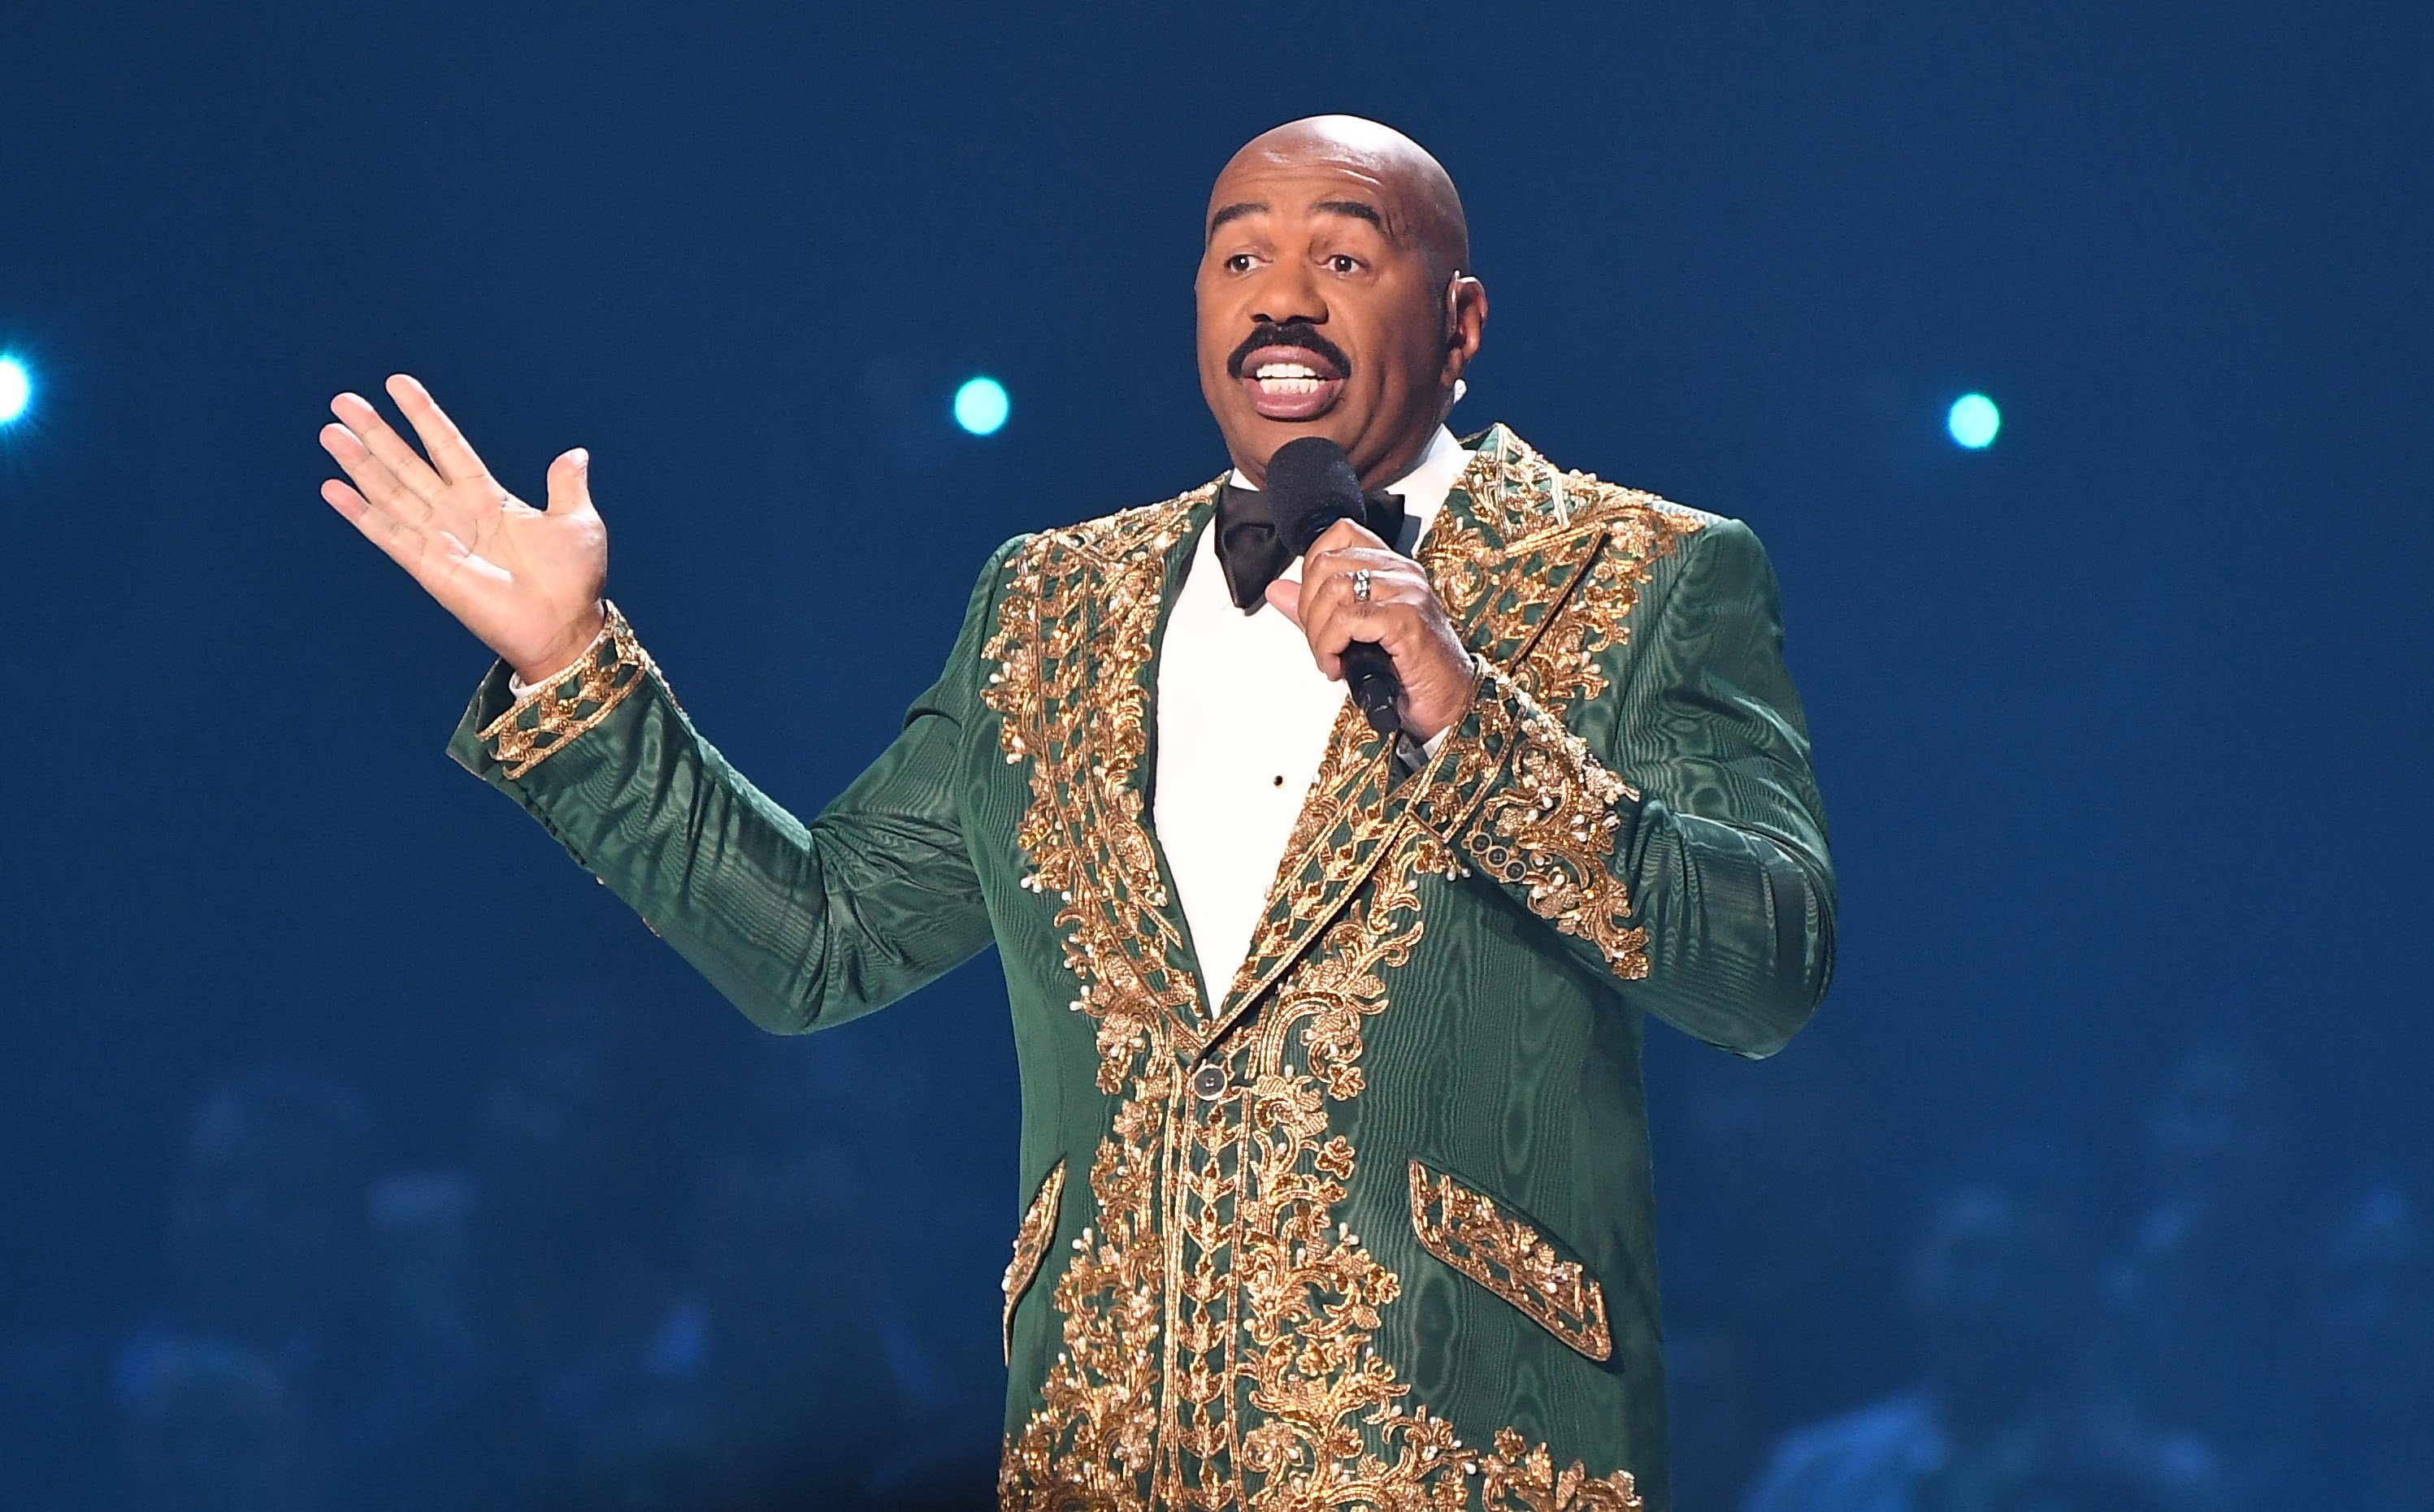 Steve Harvey speaking at the 2019 Miss Universe Pageant at Tyler Perry Studios on December 08, 2019 in Atlanta, Georgia | Photo: Getty Images